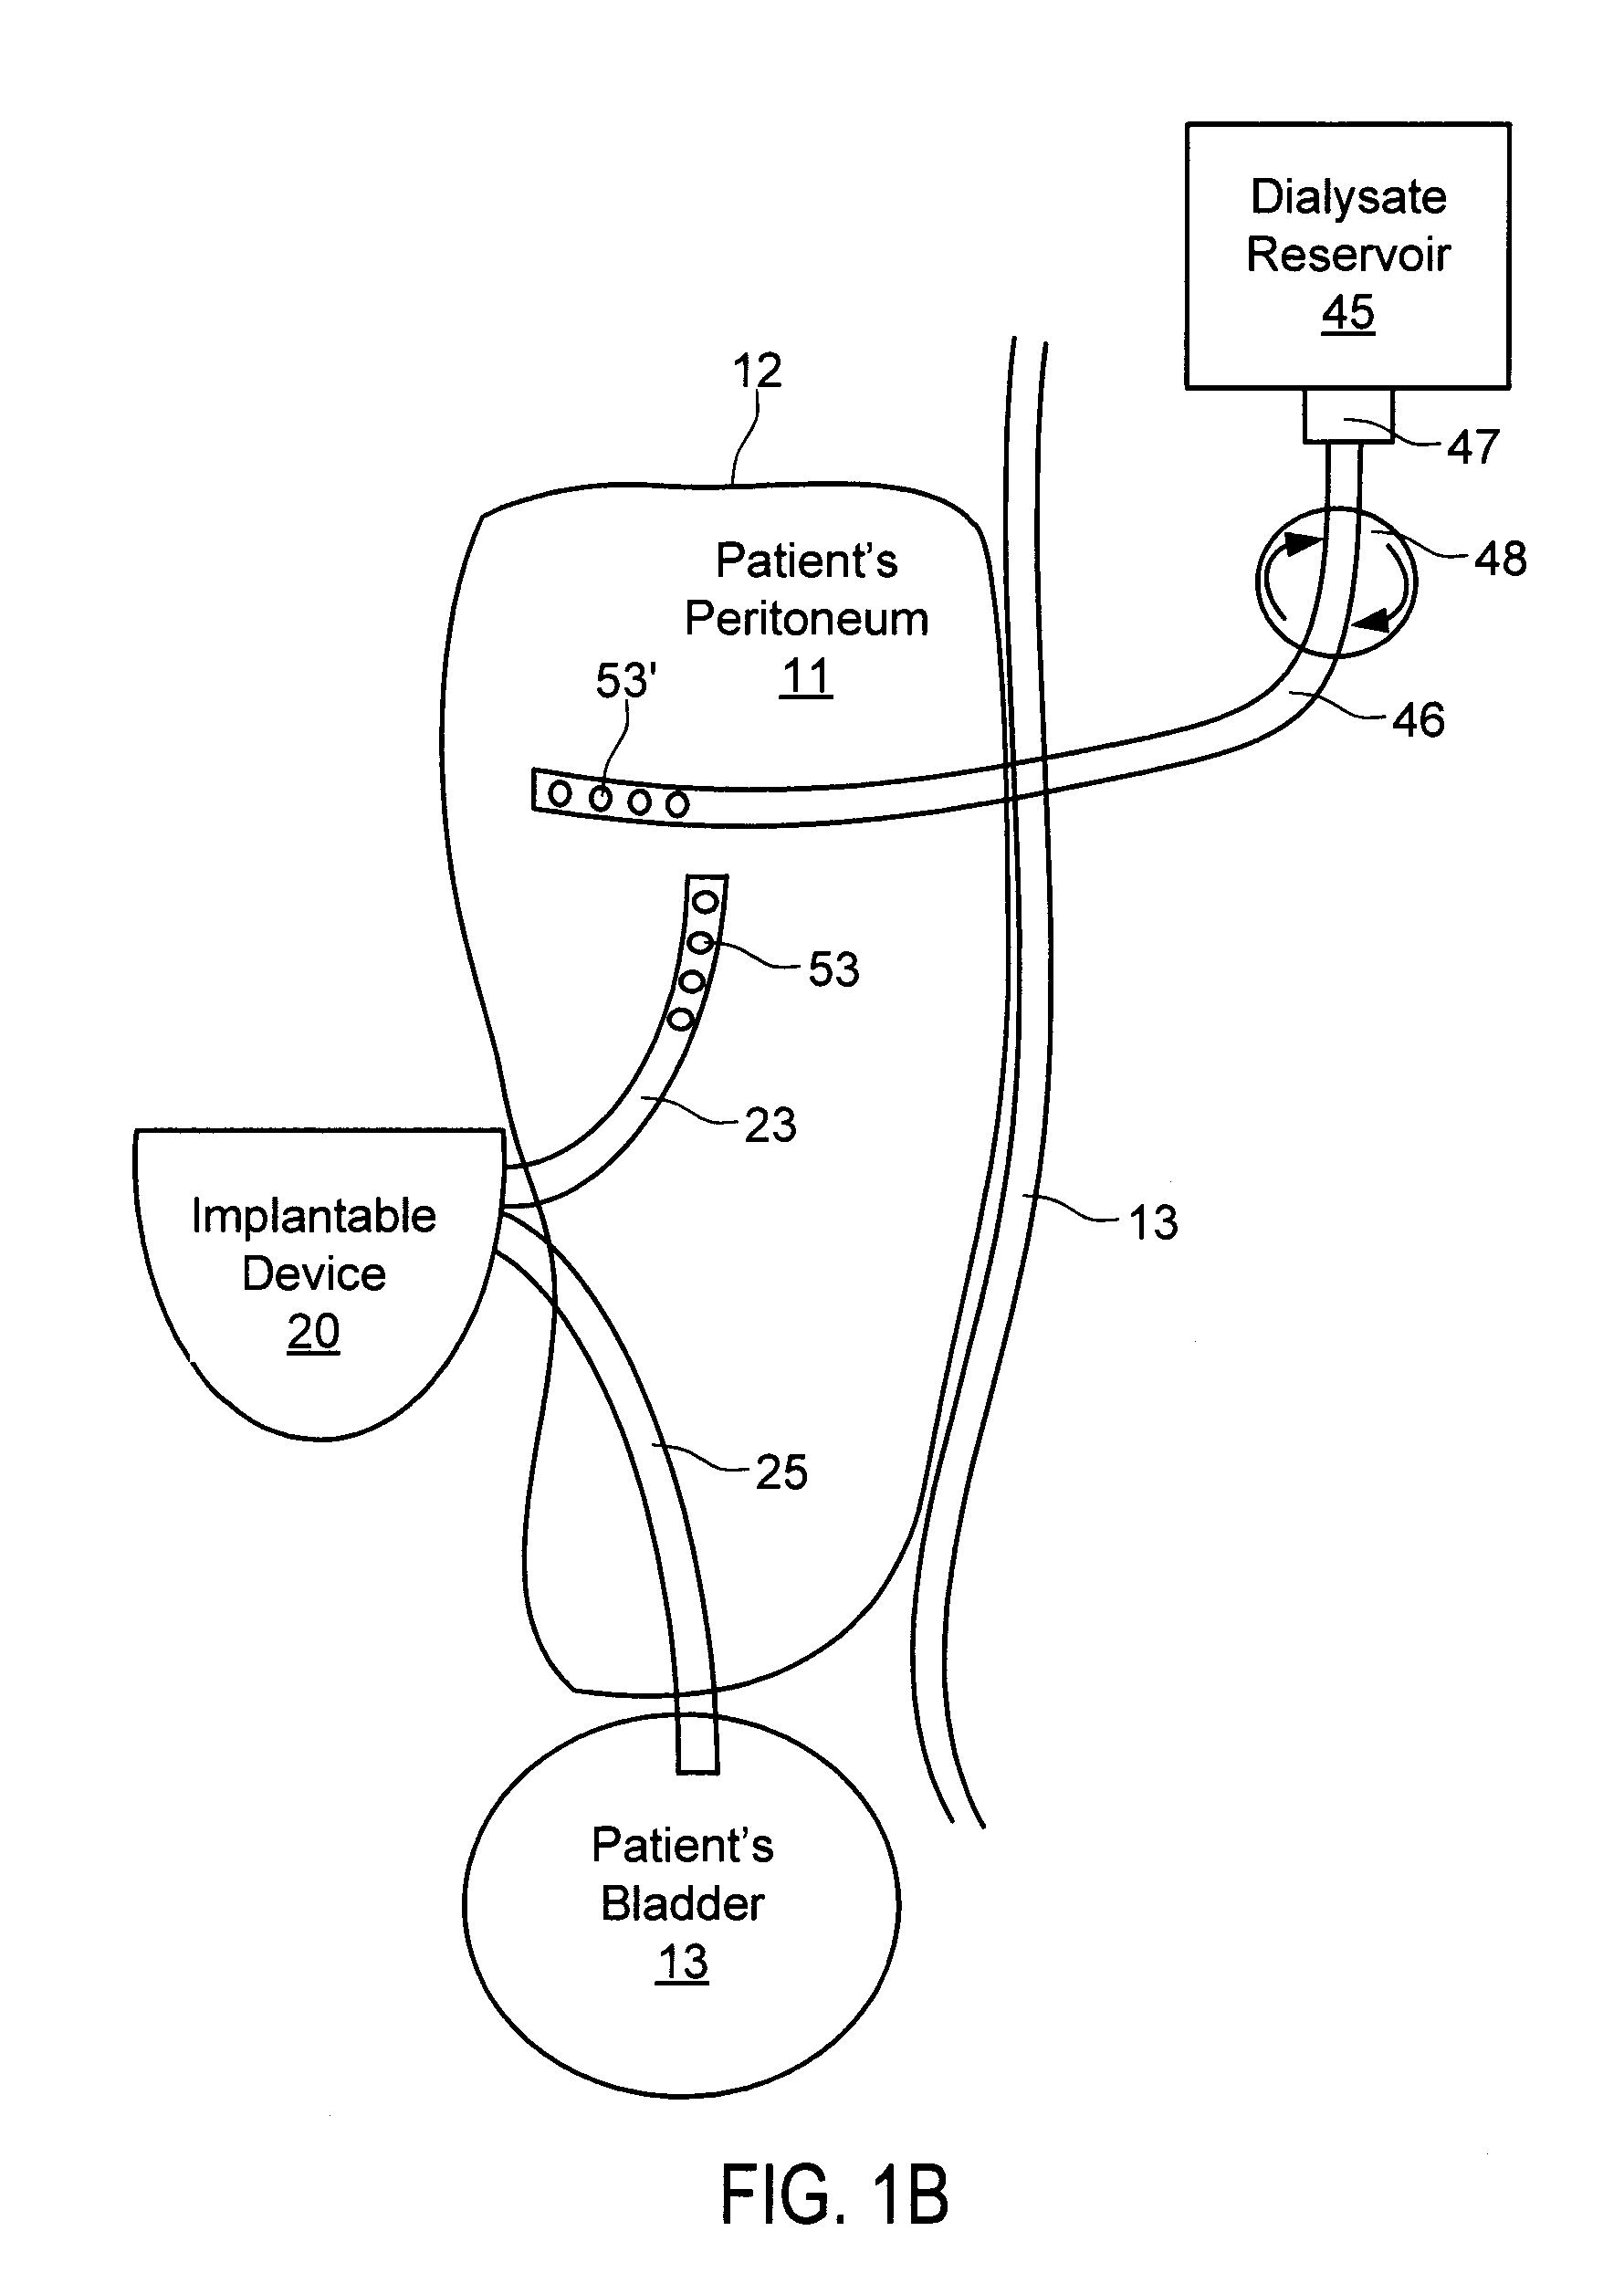 Systems and methods for treating chronic liver failure based on peritoneal dialysis